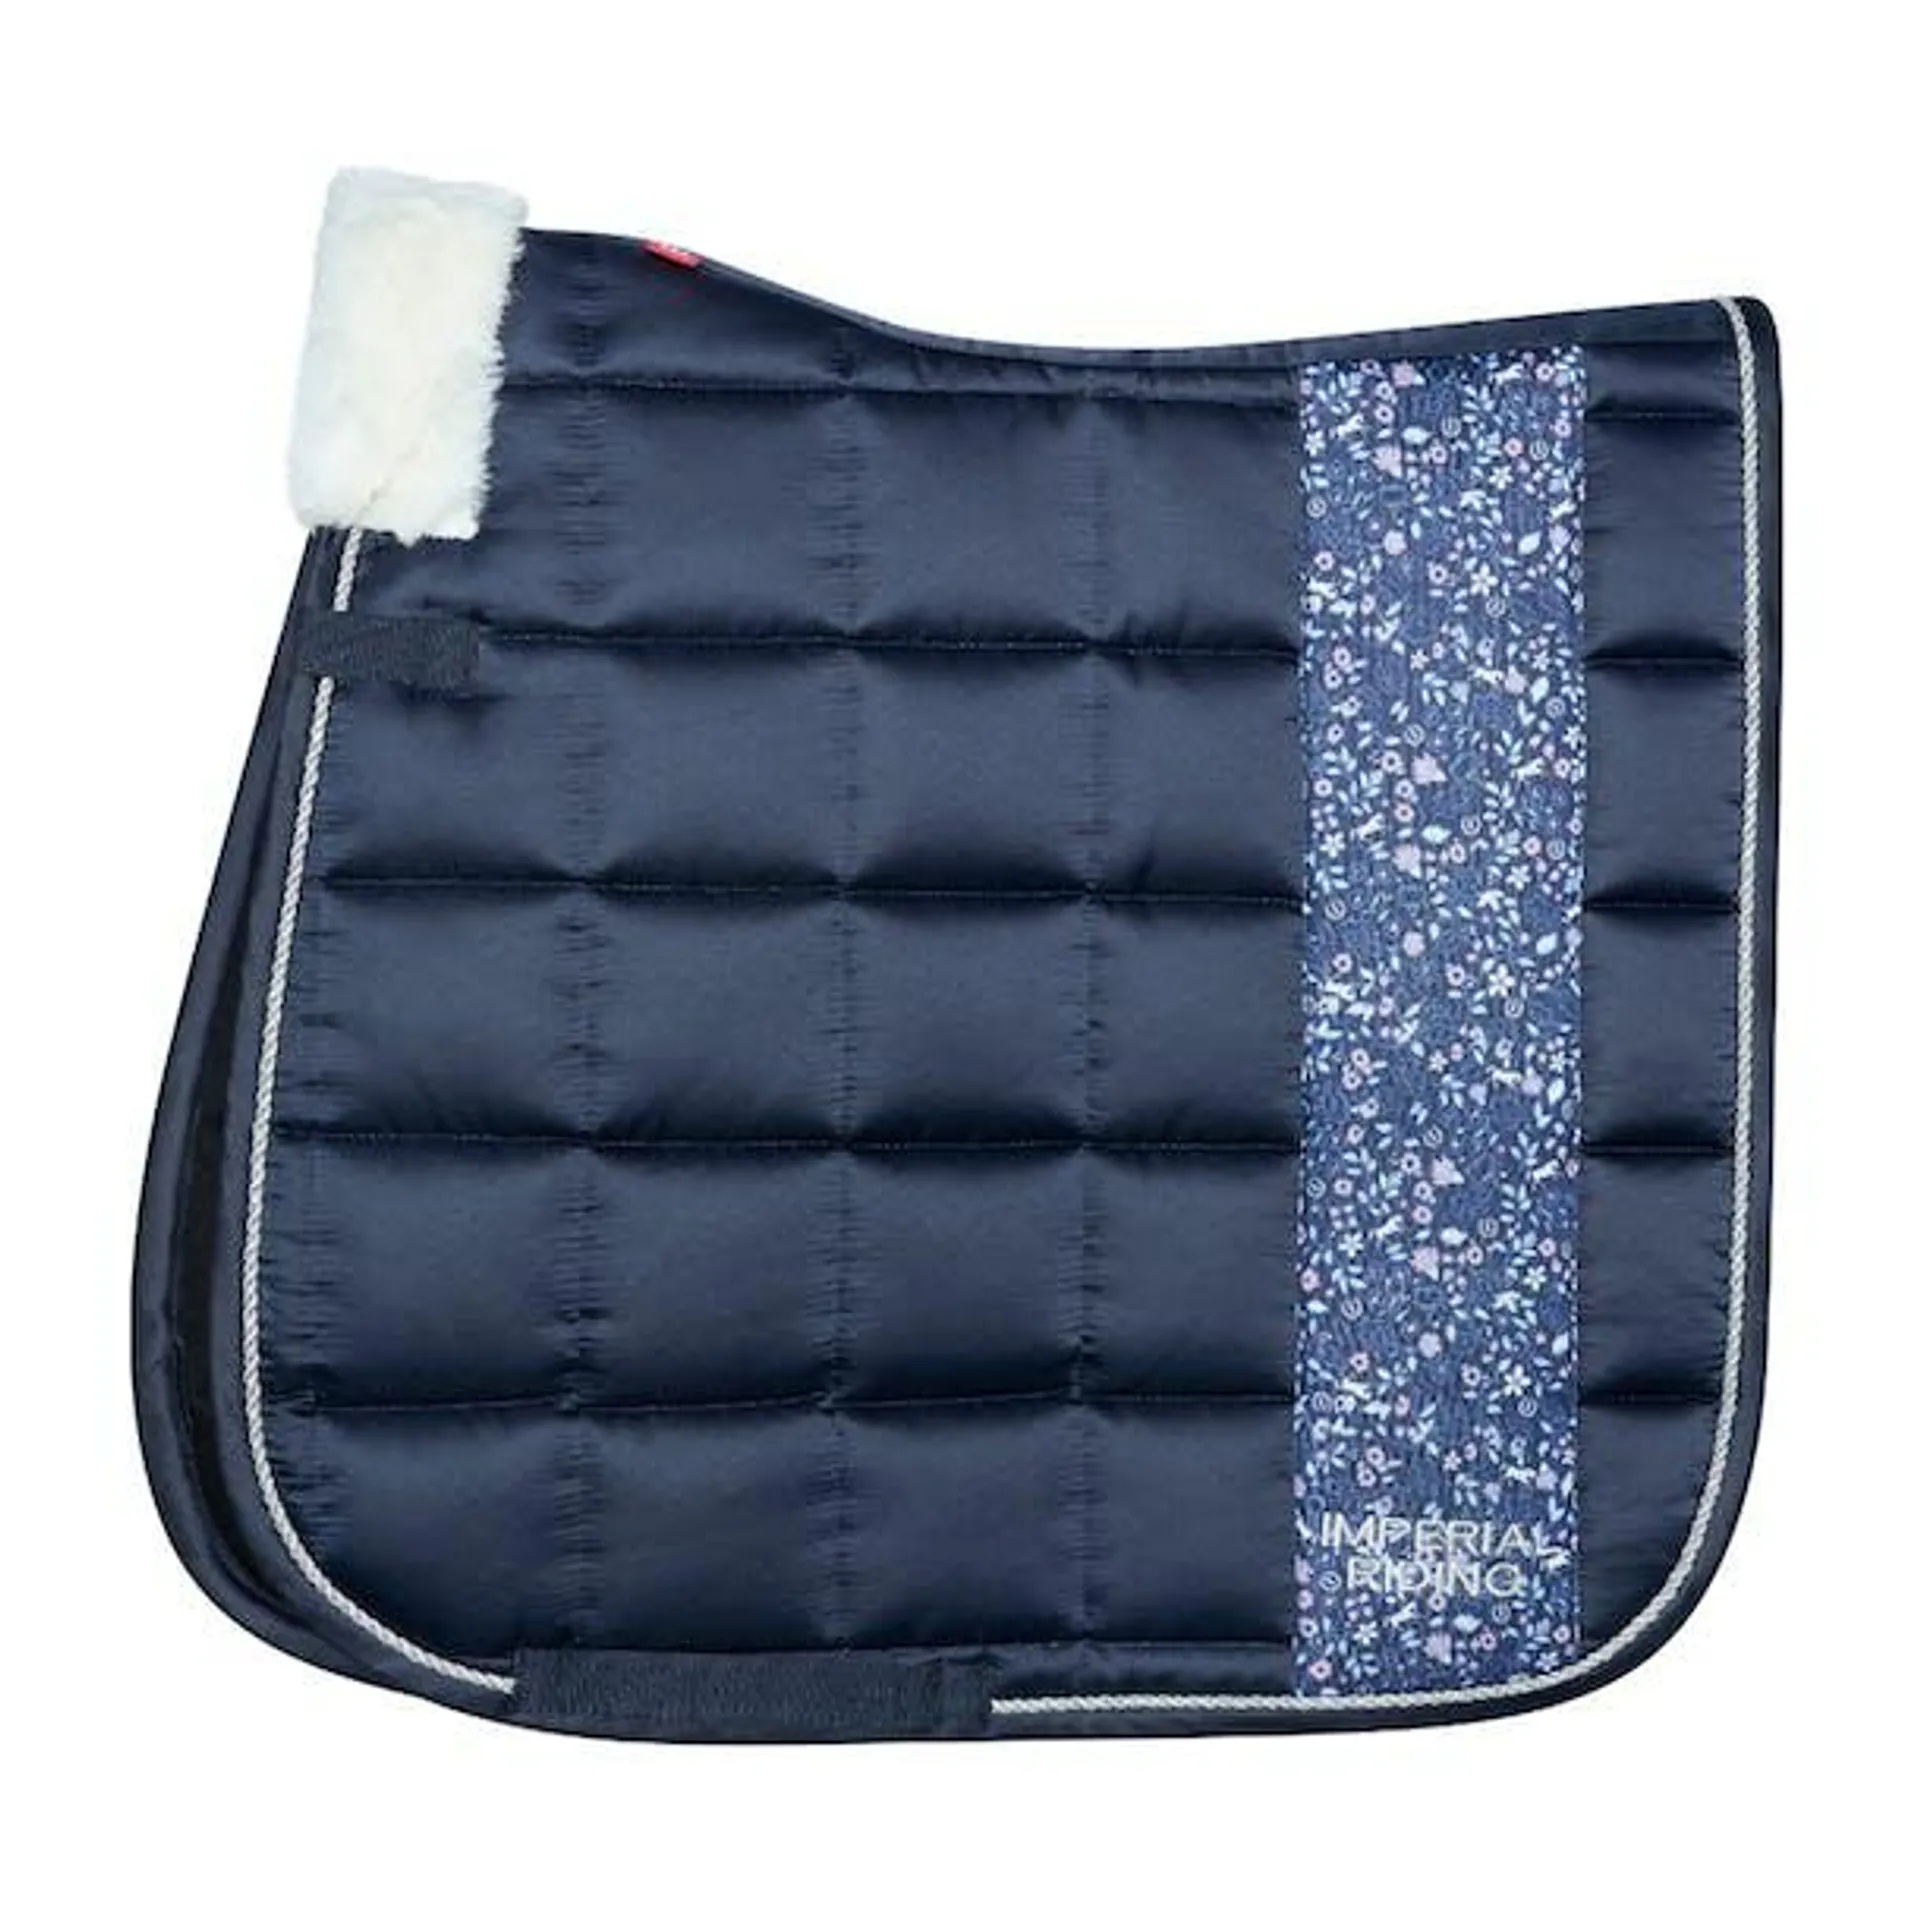 Imperial Riding Ambient Dressage Saddle pad